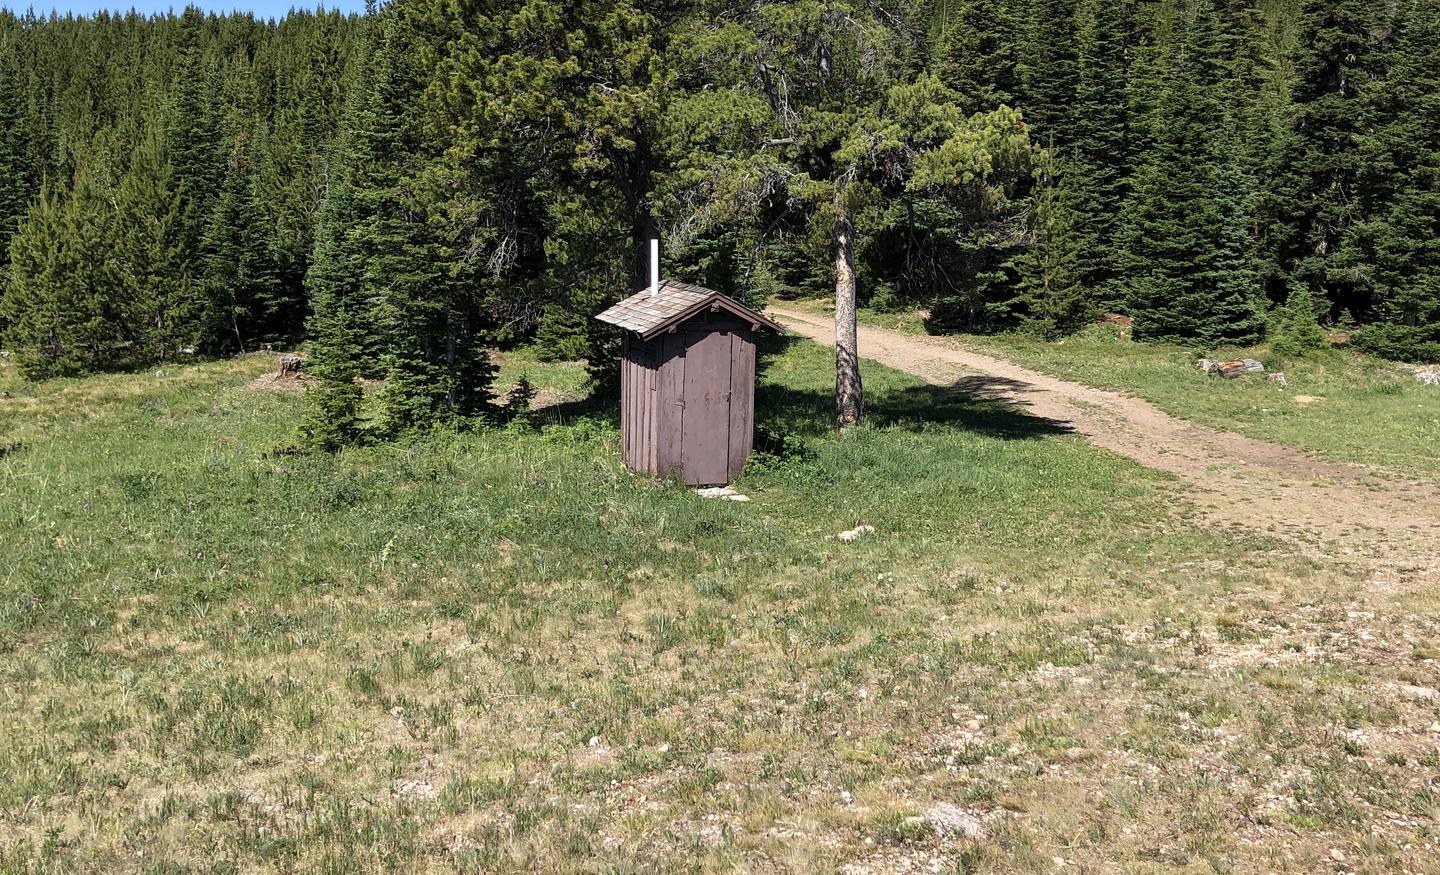 Preview photo of Little Bear Cabin